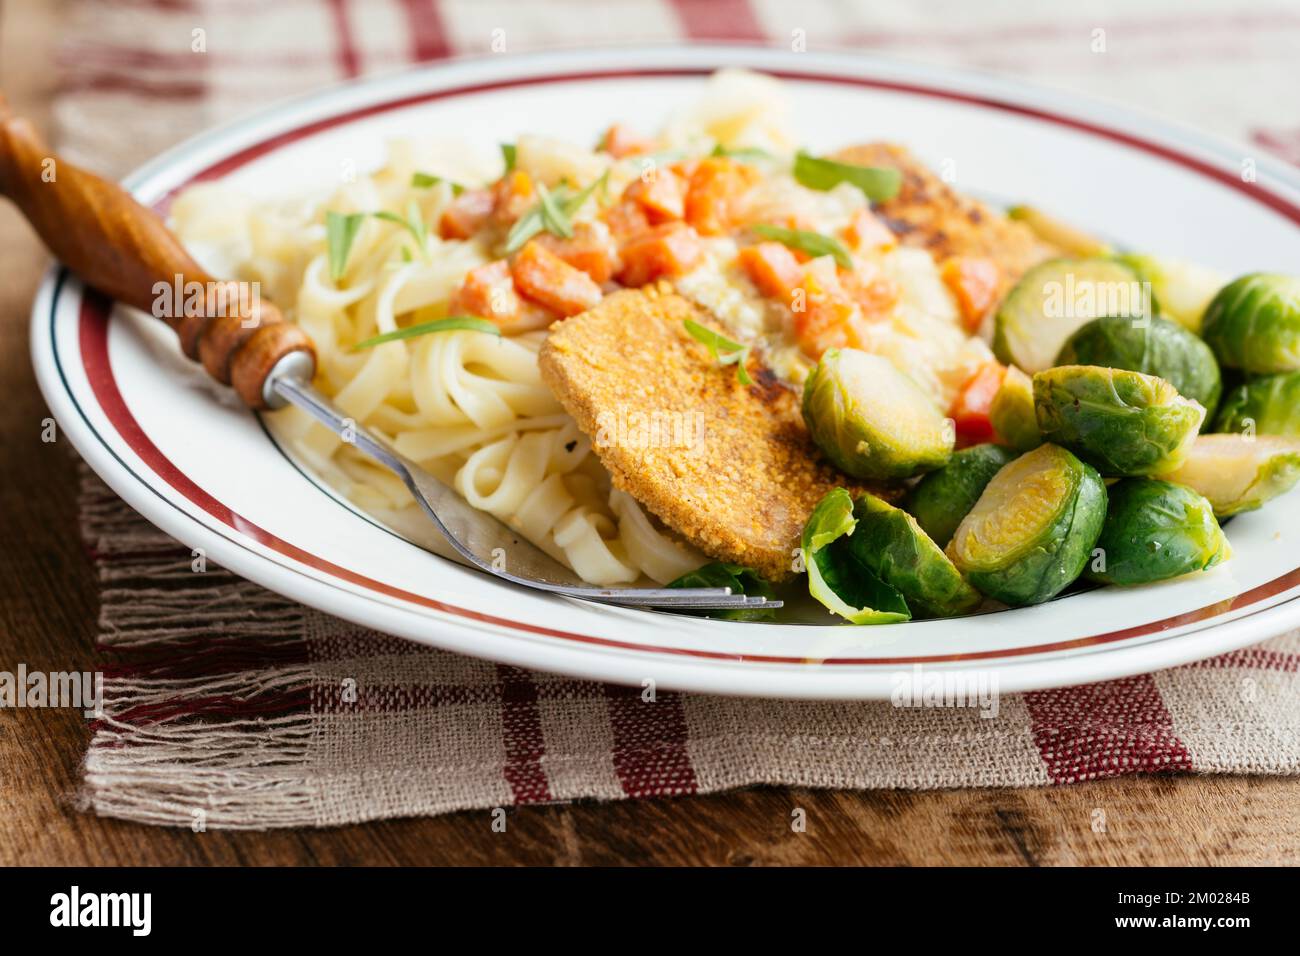 Vegetable Schnitzel on noodles with a creamy tarragon vegetable sauce and Brussels sprouts. Stock Photo